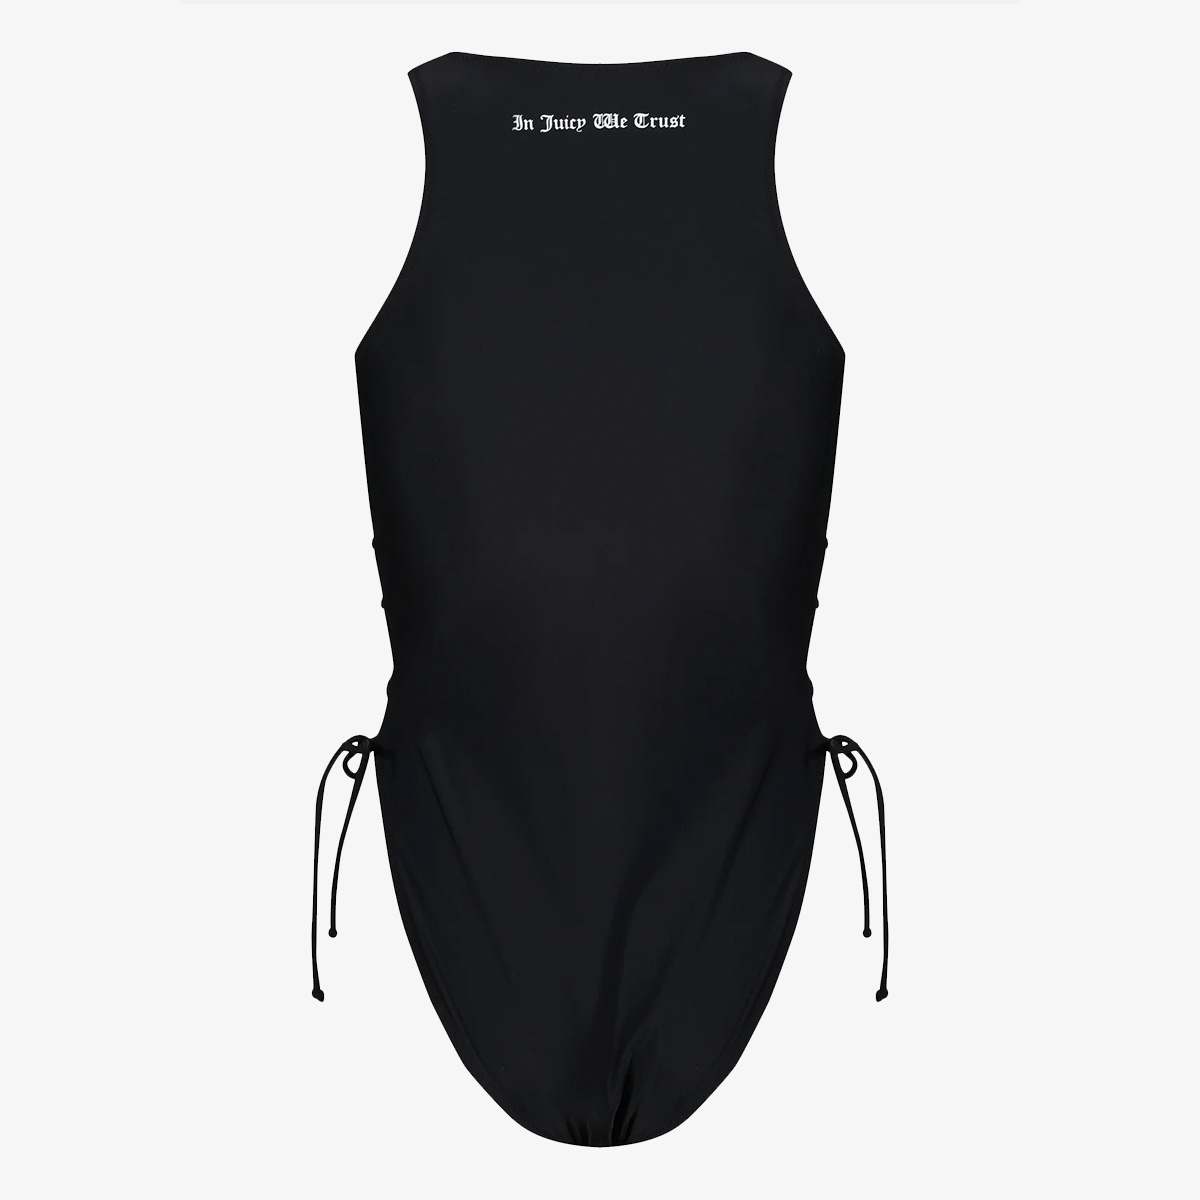 JUICY COUTURE COSTUM BAIE ( INTREG) ONE PIECE SWIMSUIT WITH LATTICE DETAIL 